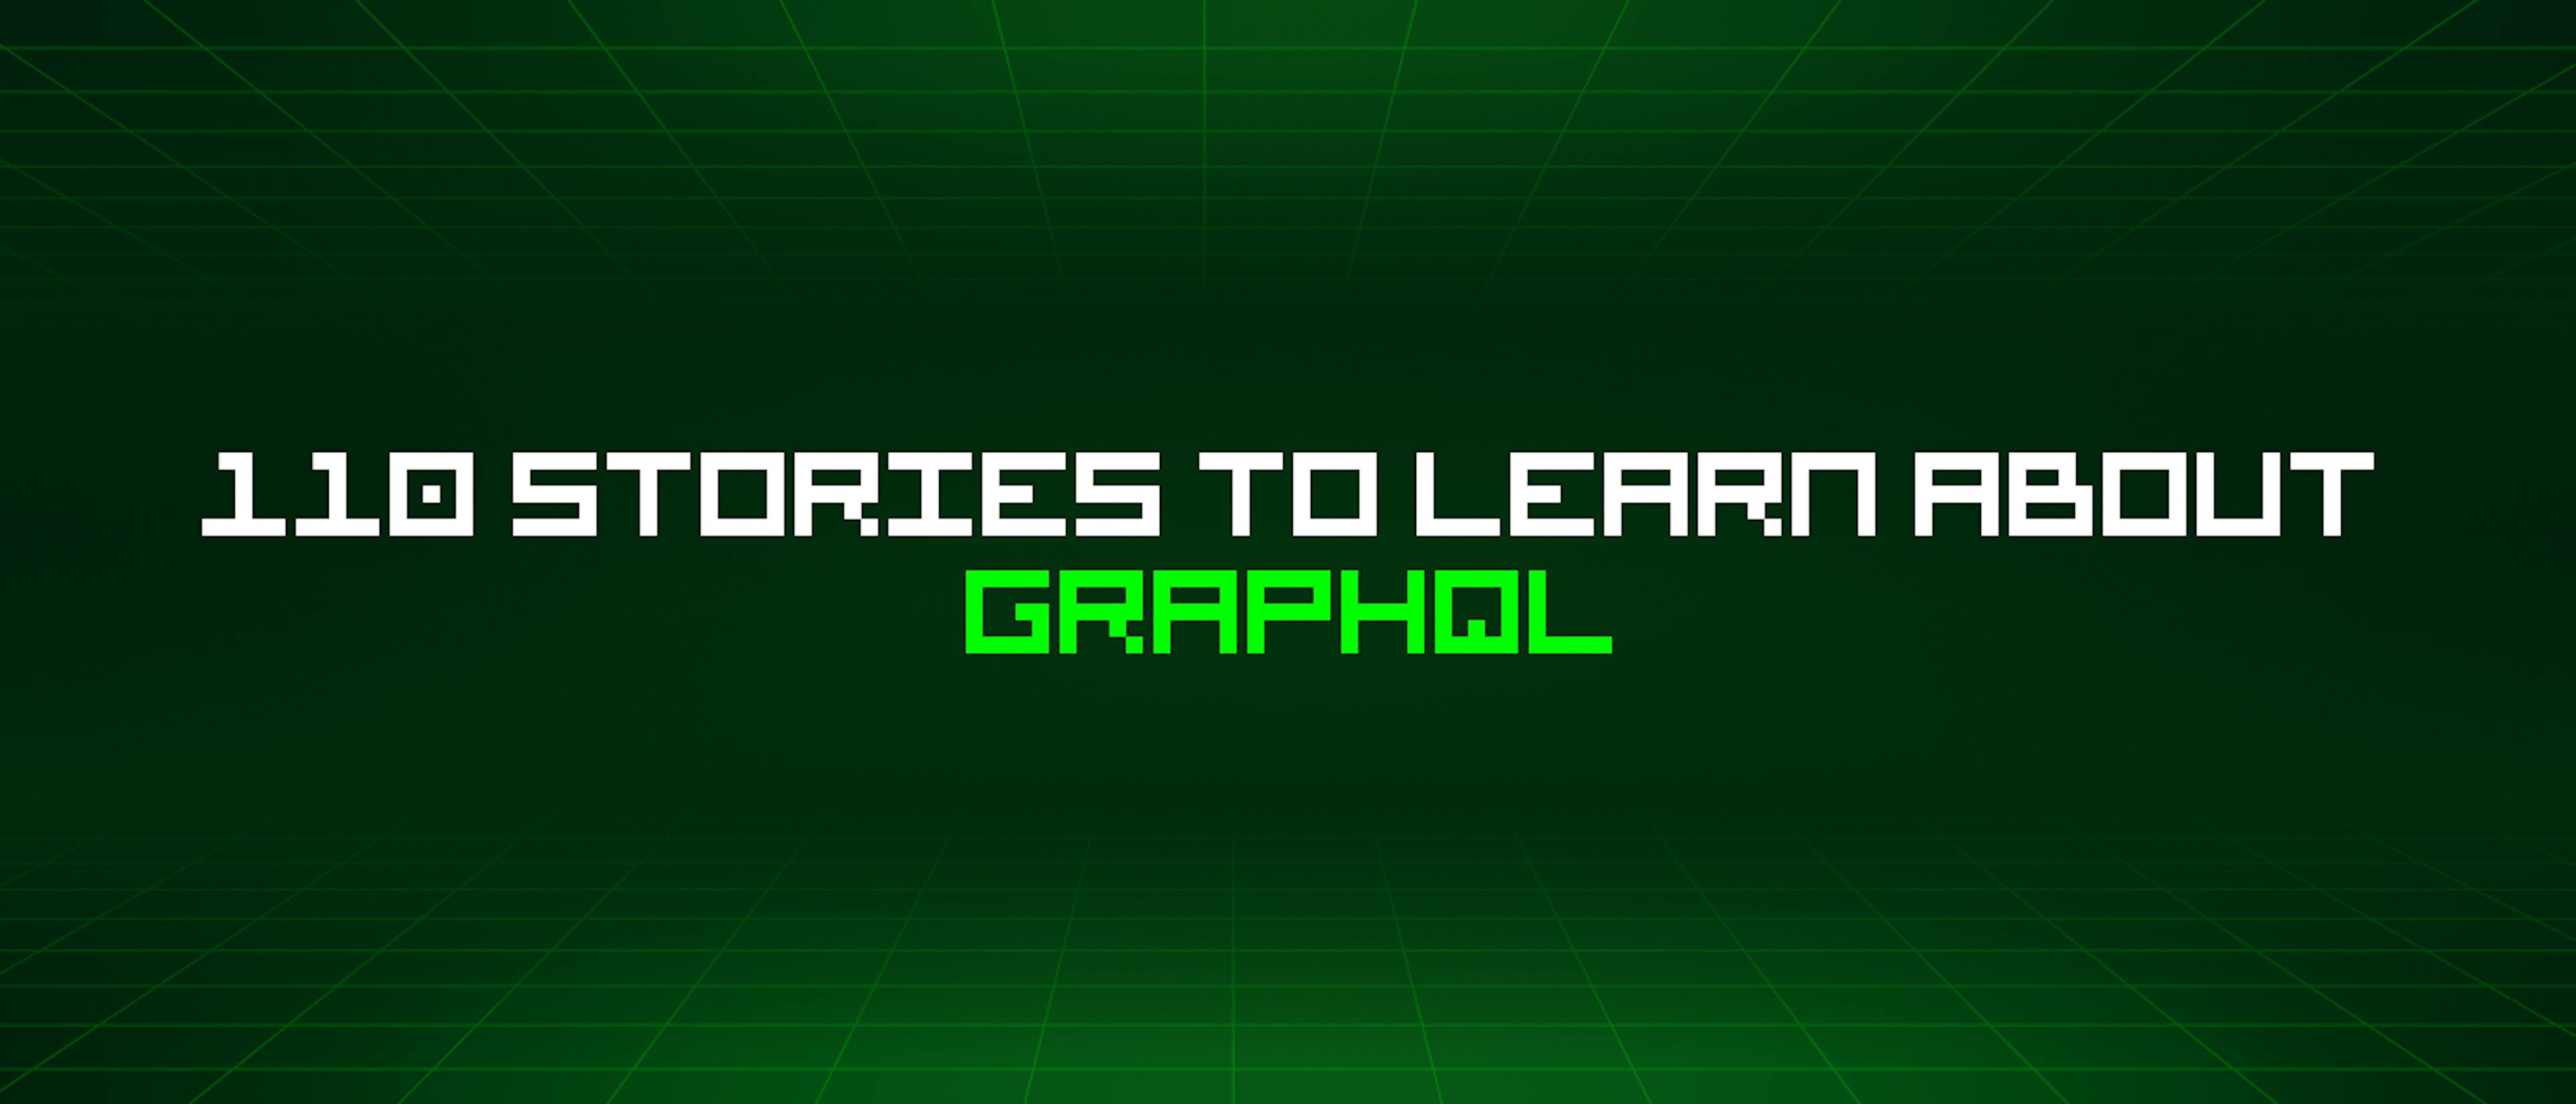 featured image - 110 Stories To Learn About Graphql